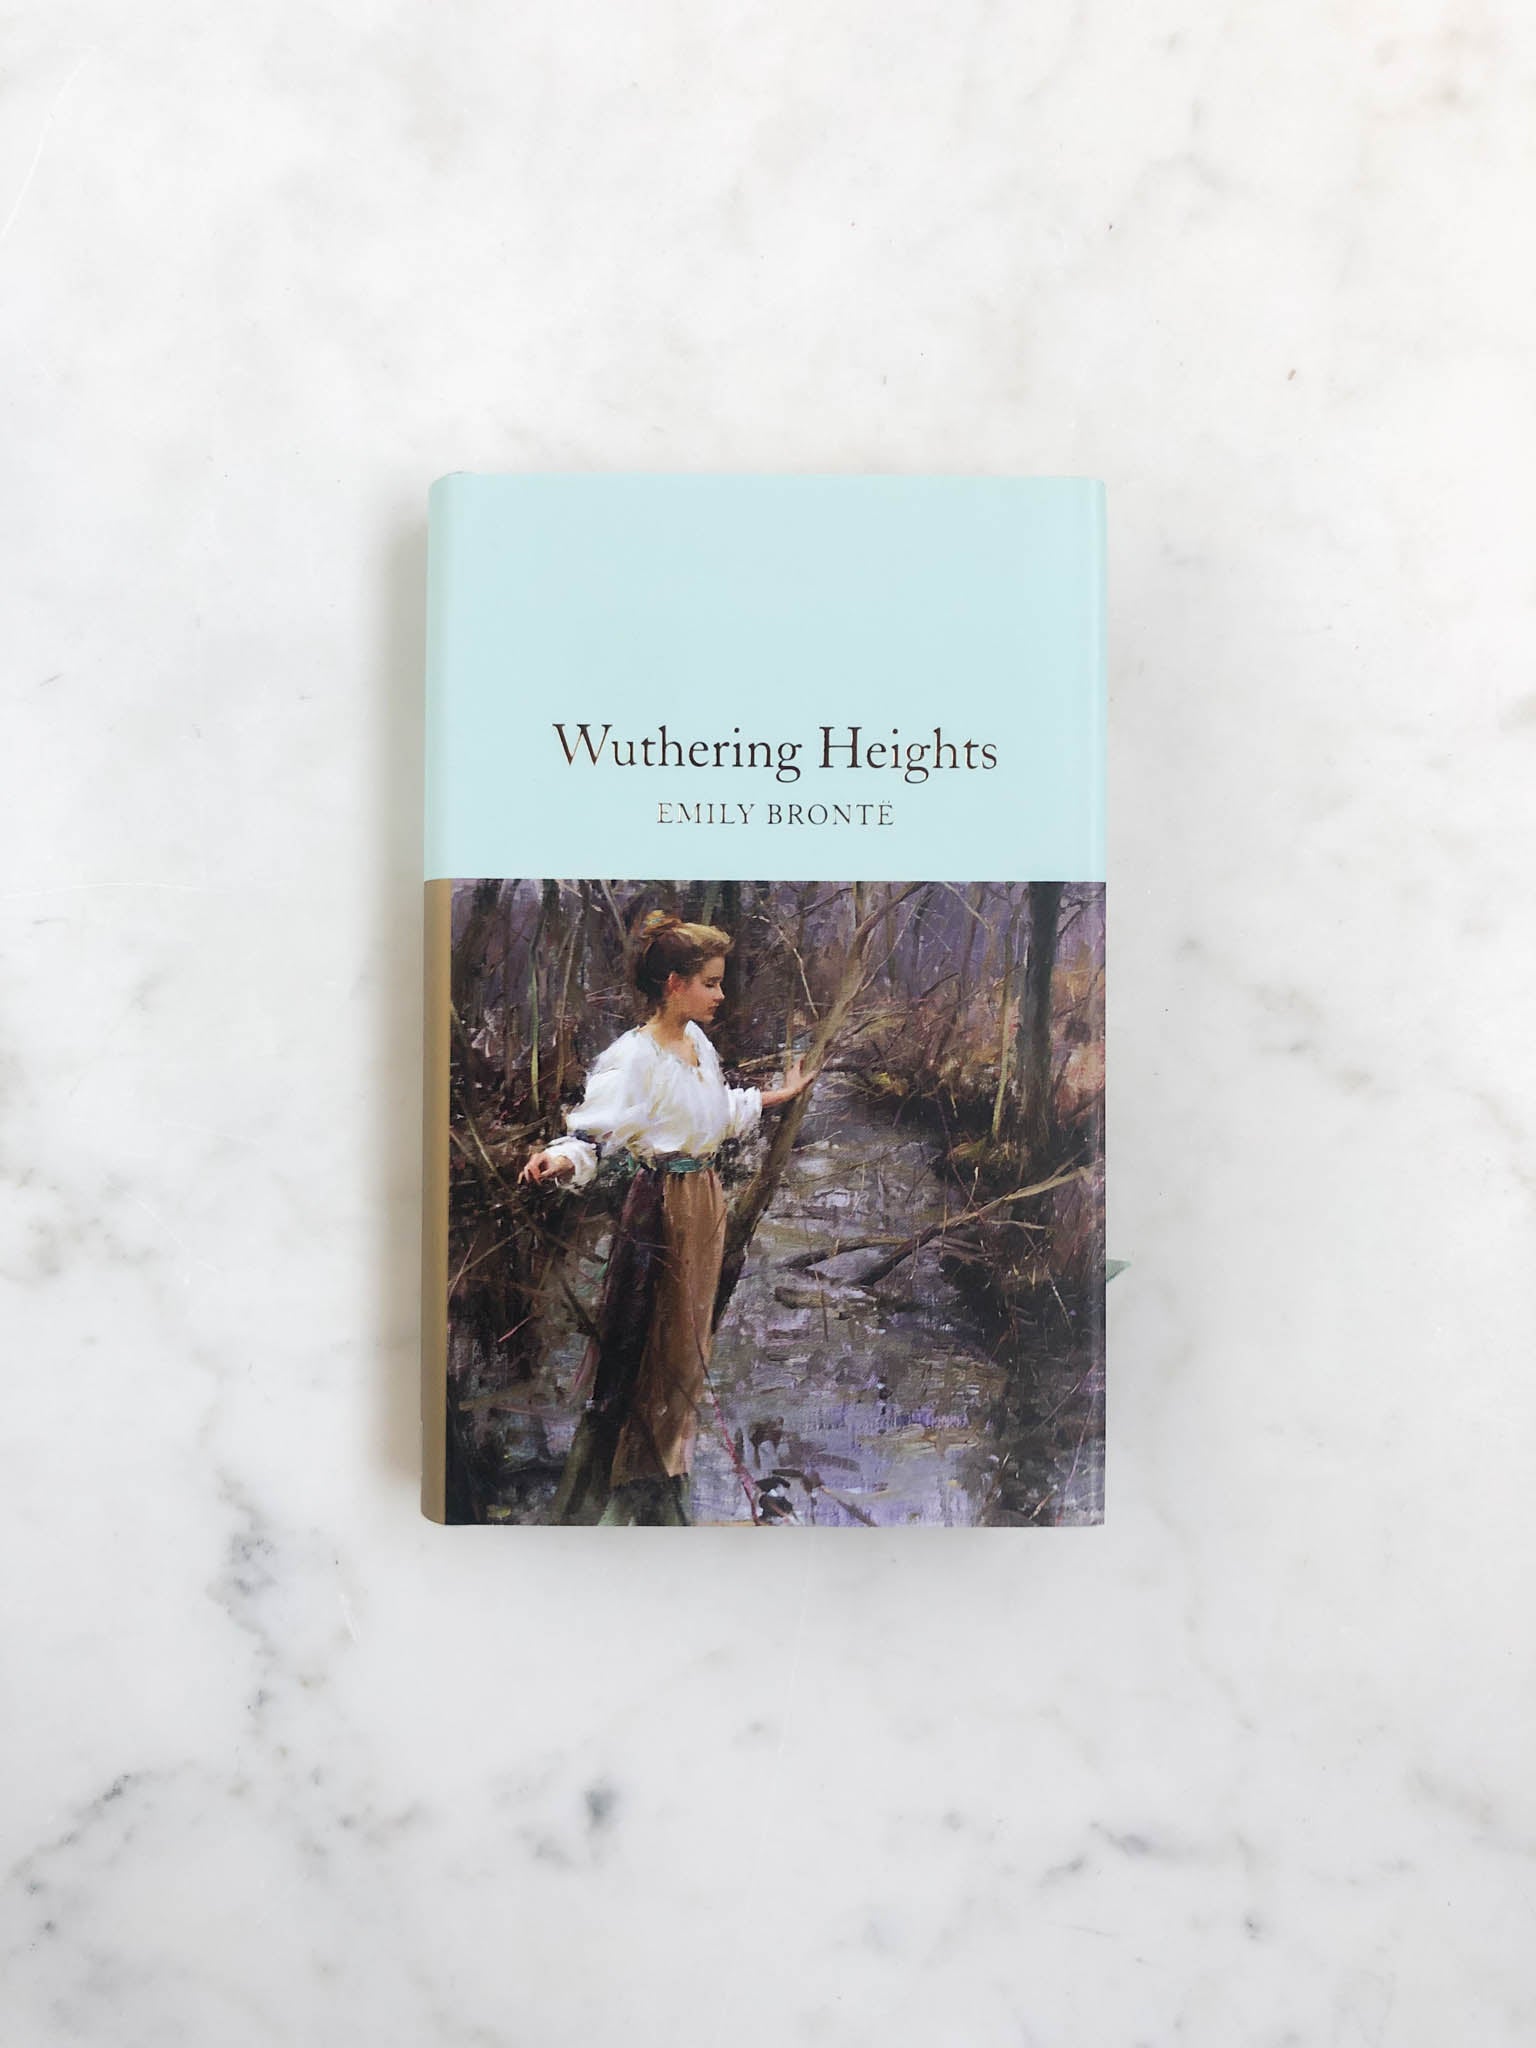 Wuthering Heights: Emily Brontë